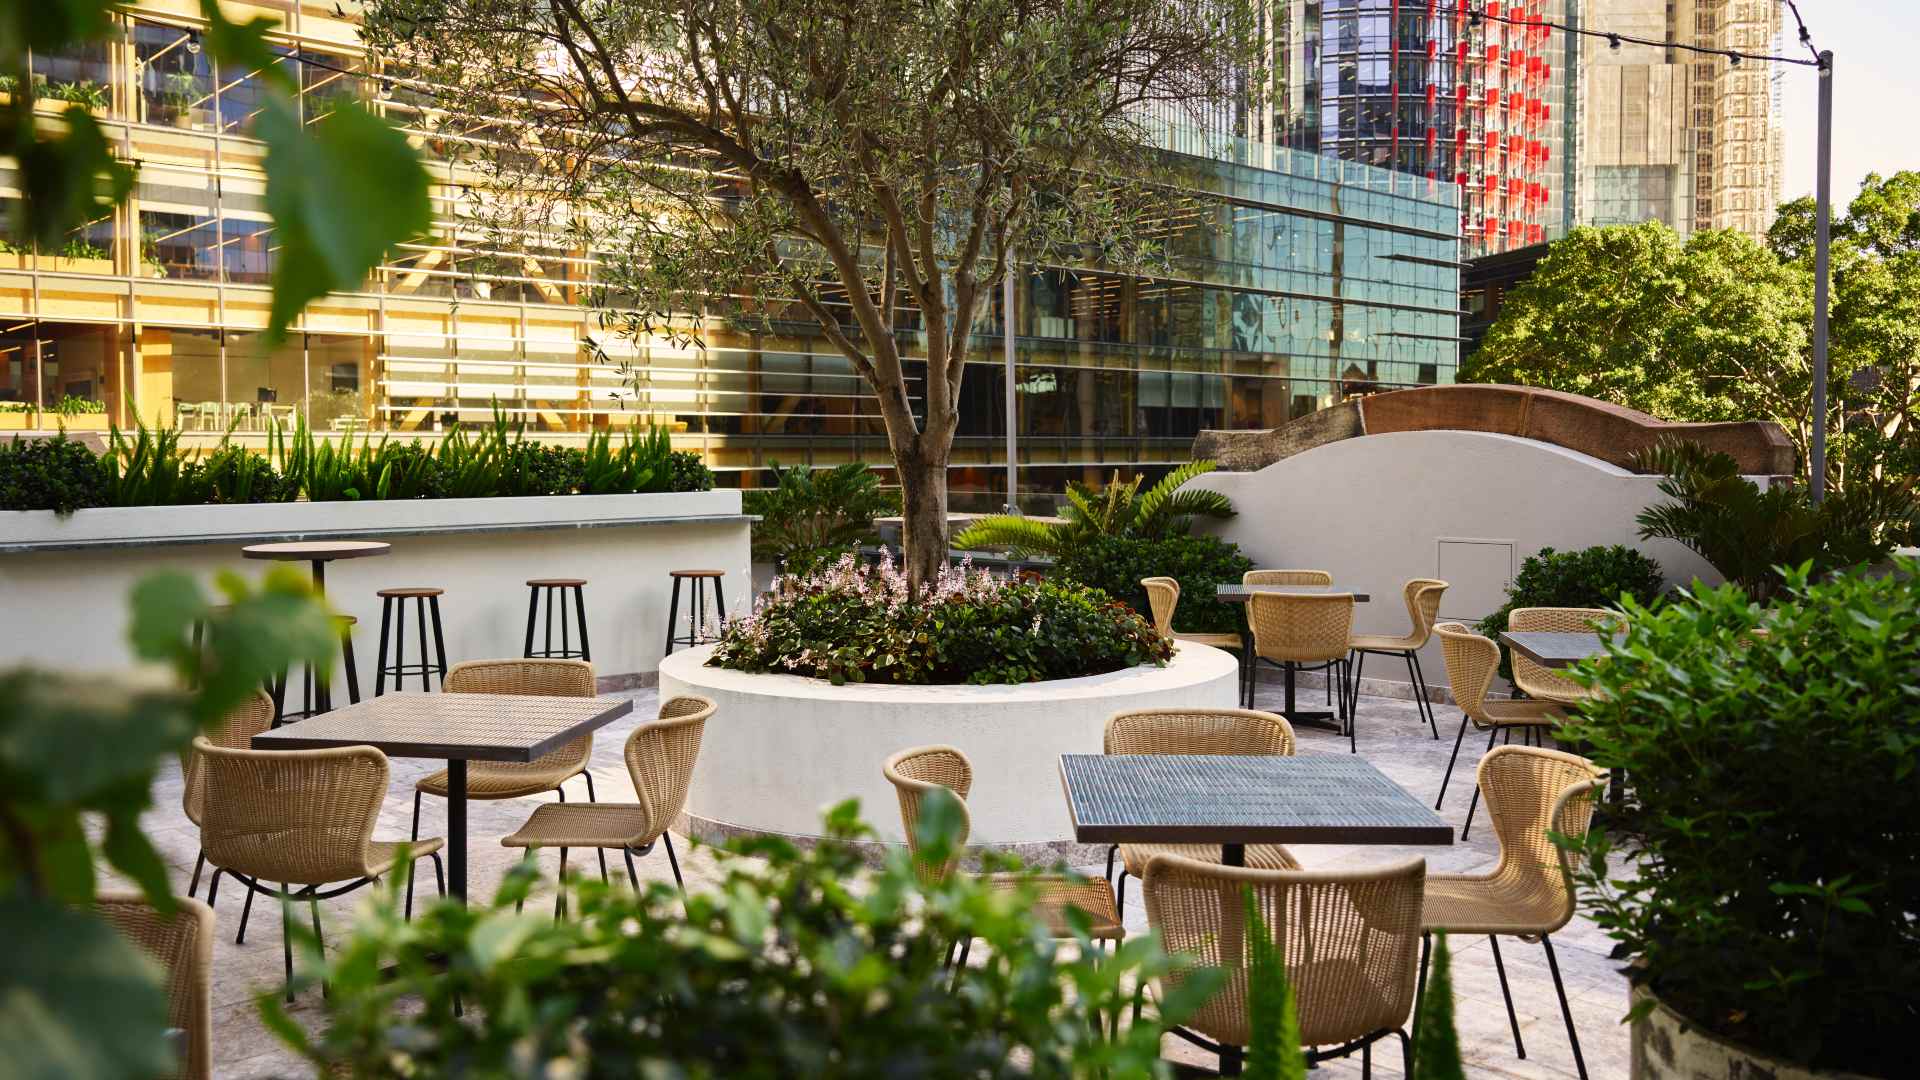 Now Open: Mediterranean-Inspired Rooftop Bar The Sussex Is the Newest Sky-High Drinking Hole in Barangaroo